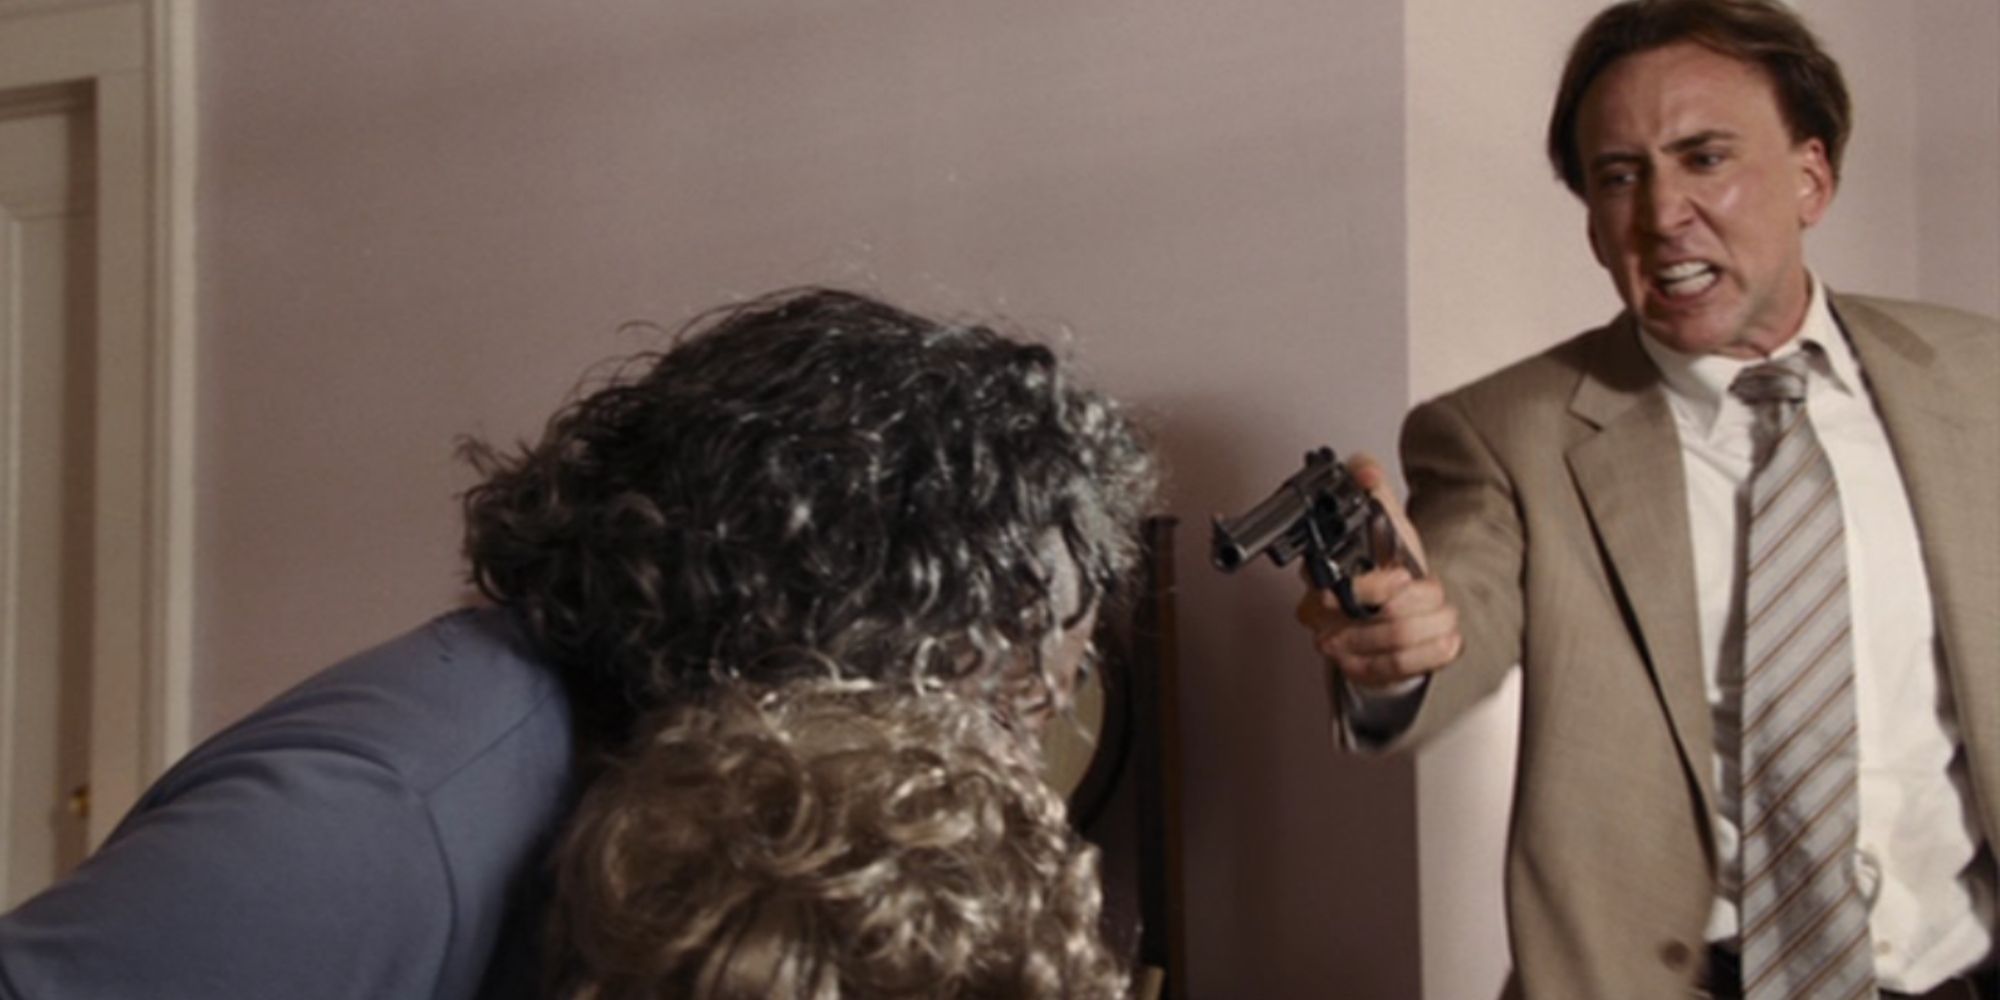 Nicolas Cage in Bad Lieutenant points gun angrily at two old ladies